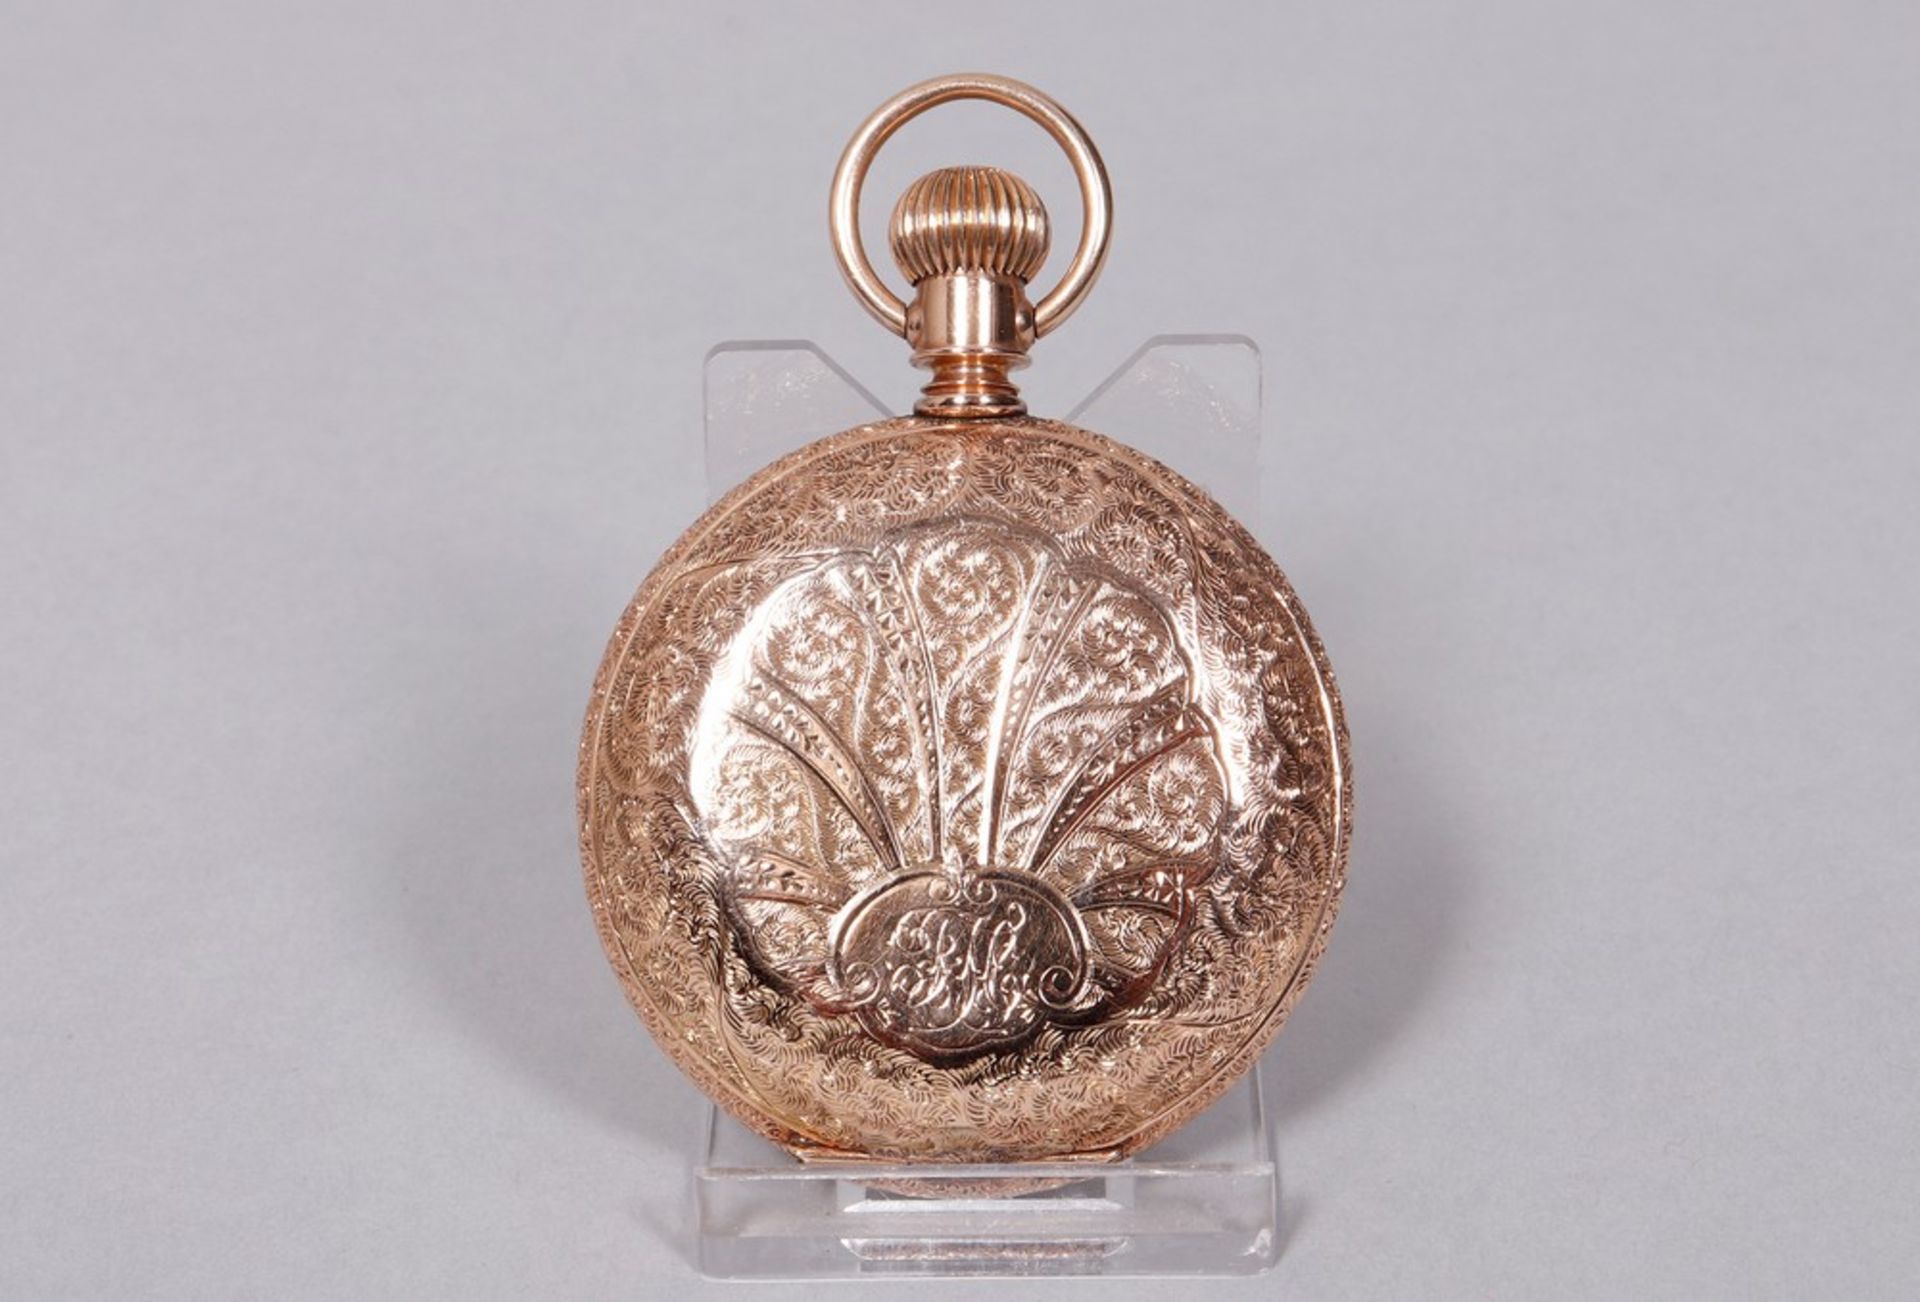 Very rare American pocket watch from 1894, Seth Thomas, Thomaston, Conn., made of 585 gold - Image 4 of 8